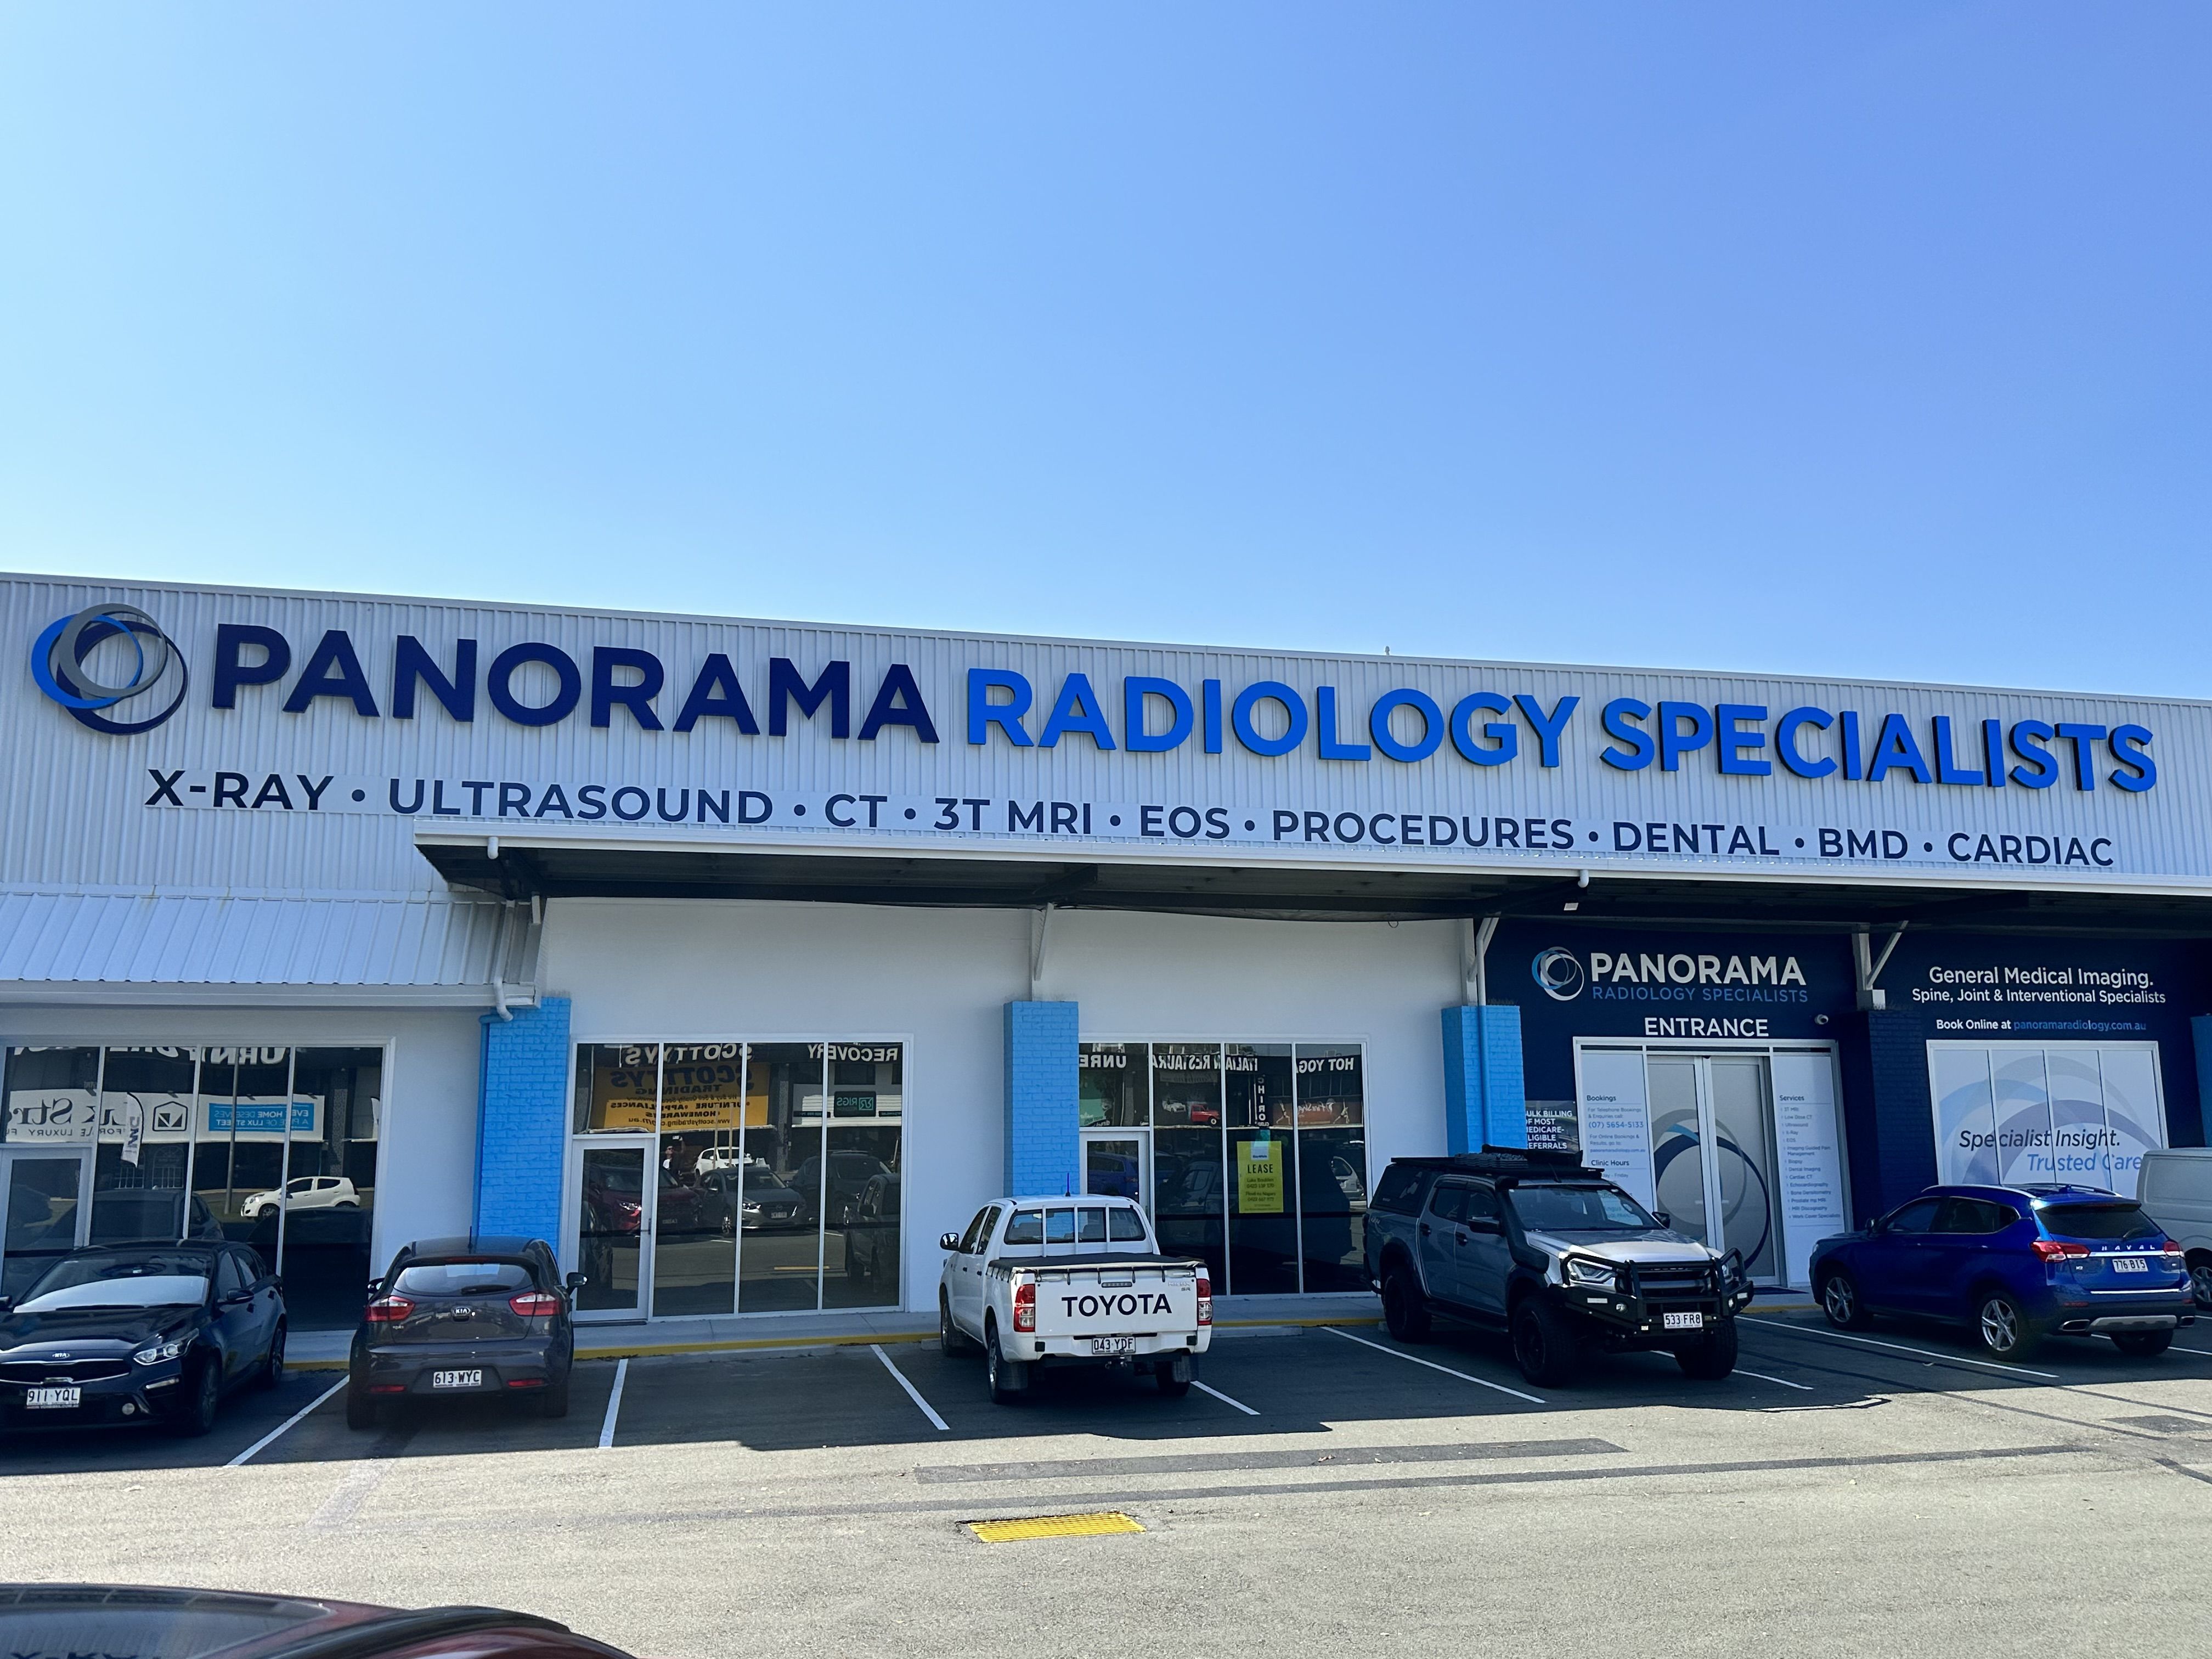 Panorama Radiology Specialists Building Signage